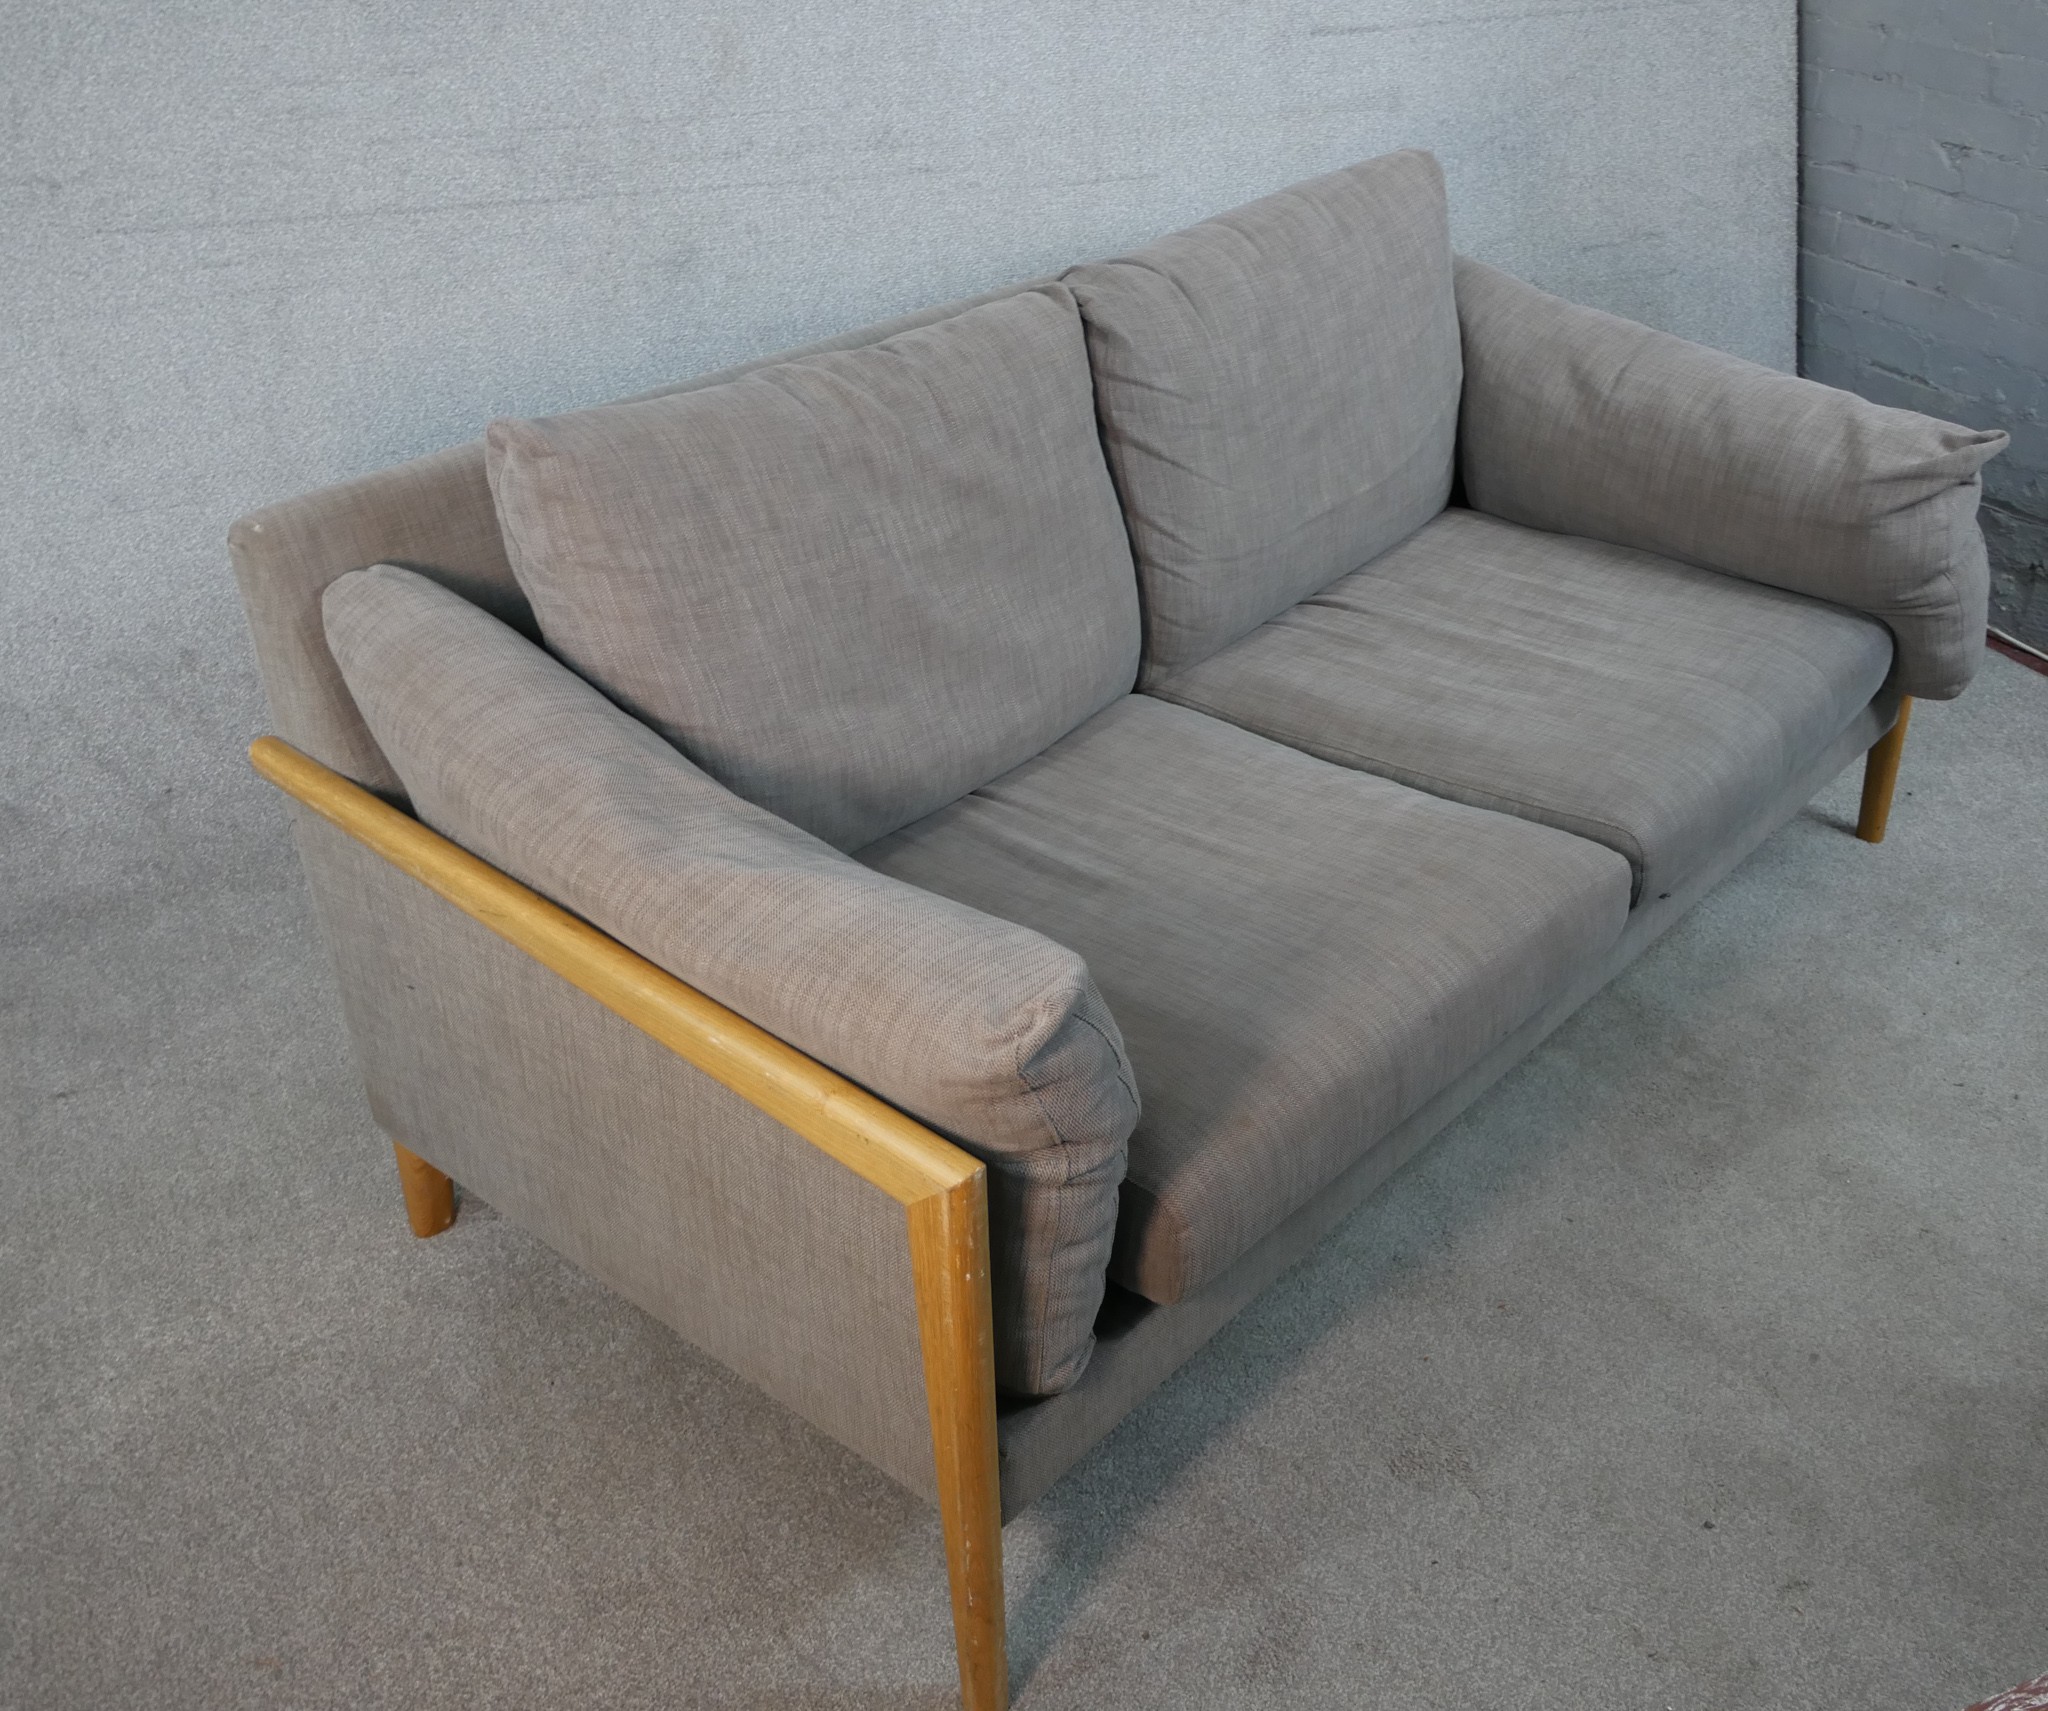 A John Lewis two seater sofa, upholstered in grey fabric, with oak arms and legs. H.77 W.192 D.88cm - Image 2 of 8